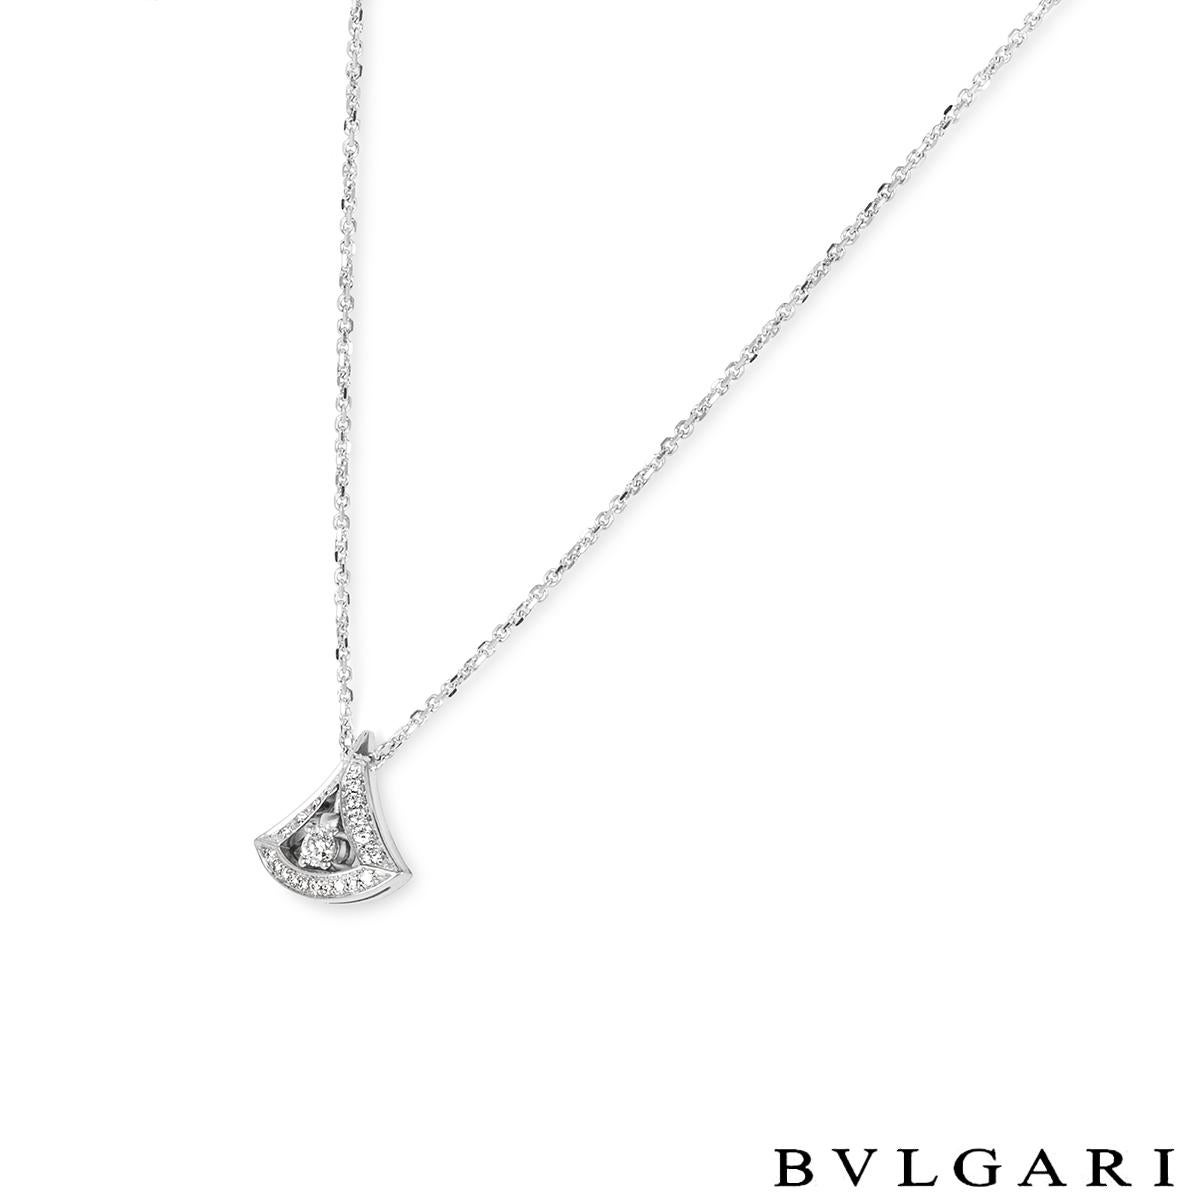 An elegant 18k white gold diamond pendant by Bvlgari from the Divas' Dream collection.  Set to the centre of the pendant is a round brilliant cut diamond surrounded by a fan-shaped motif. Further complementing the centre diamond are 22 round